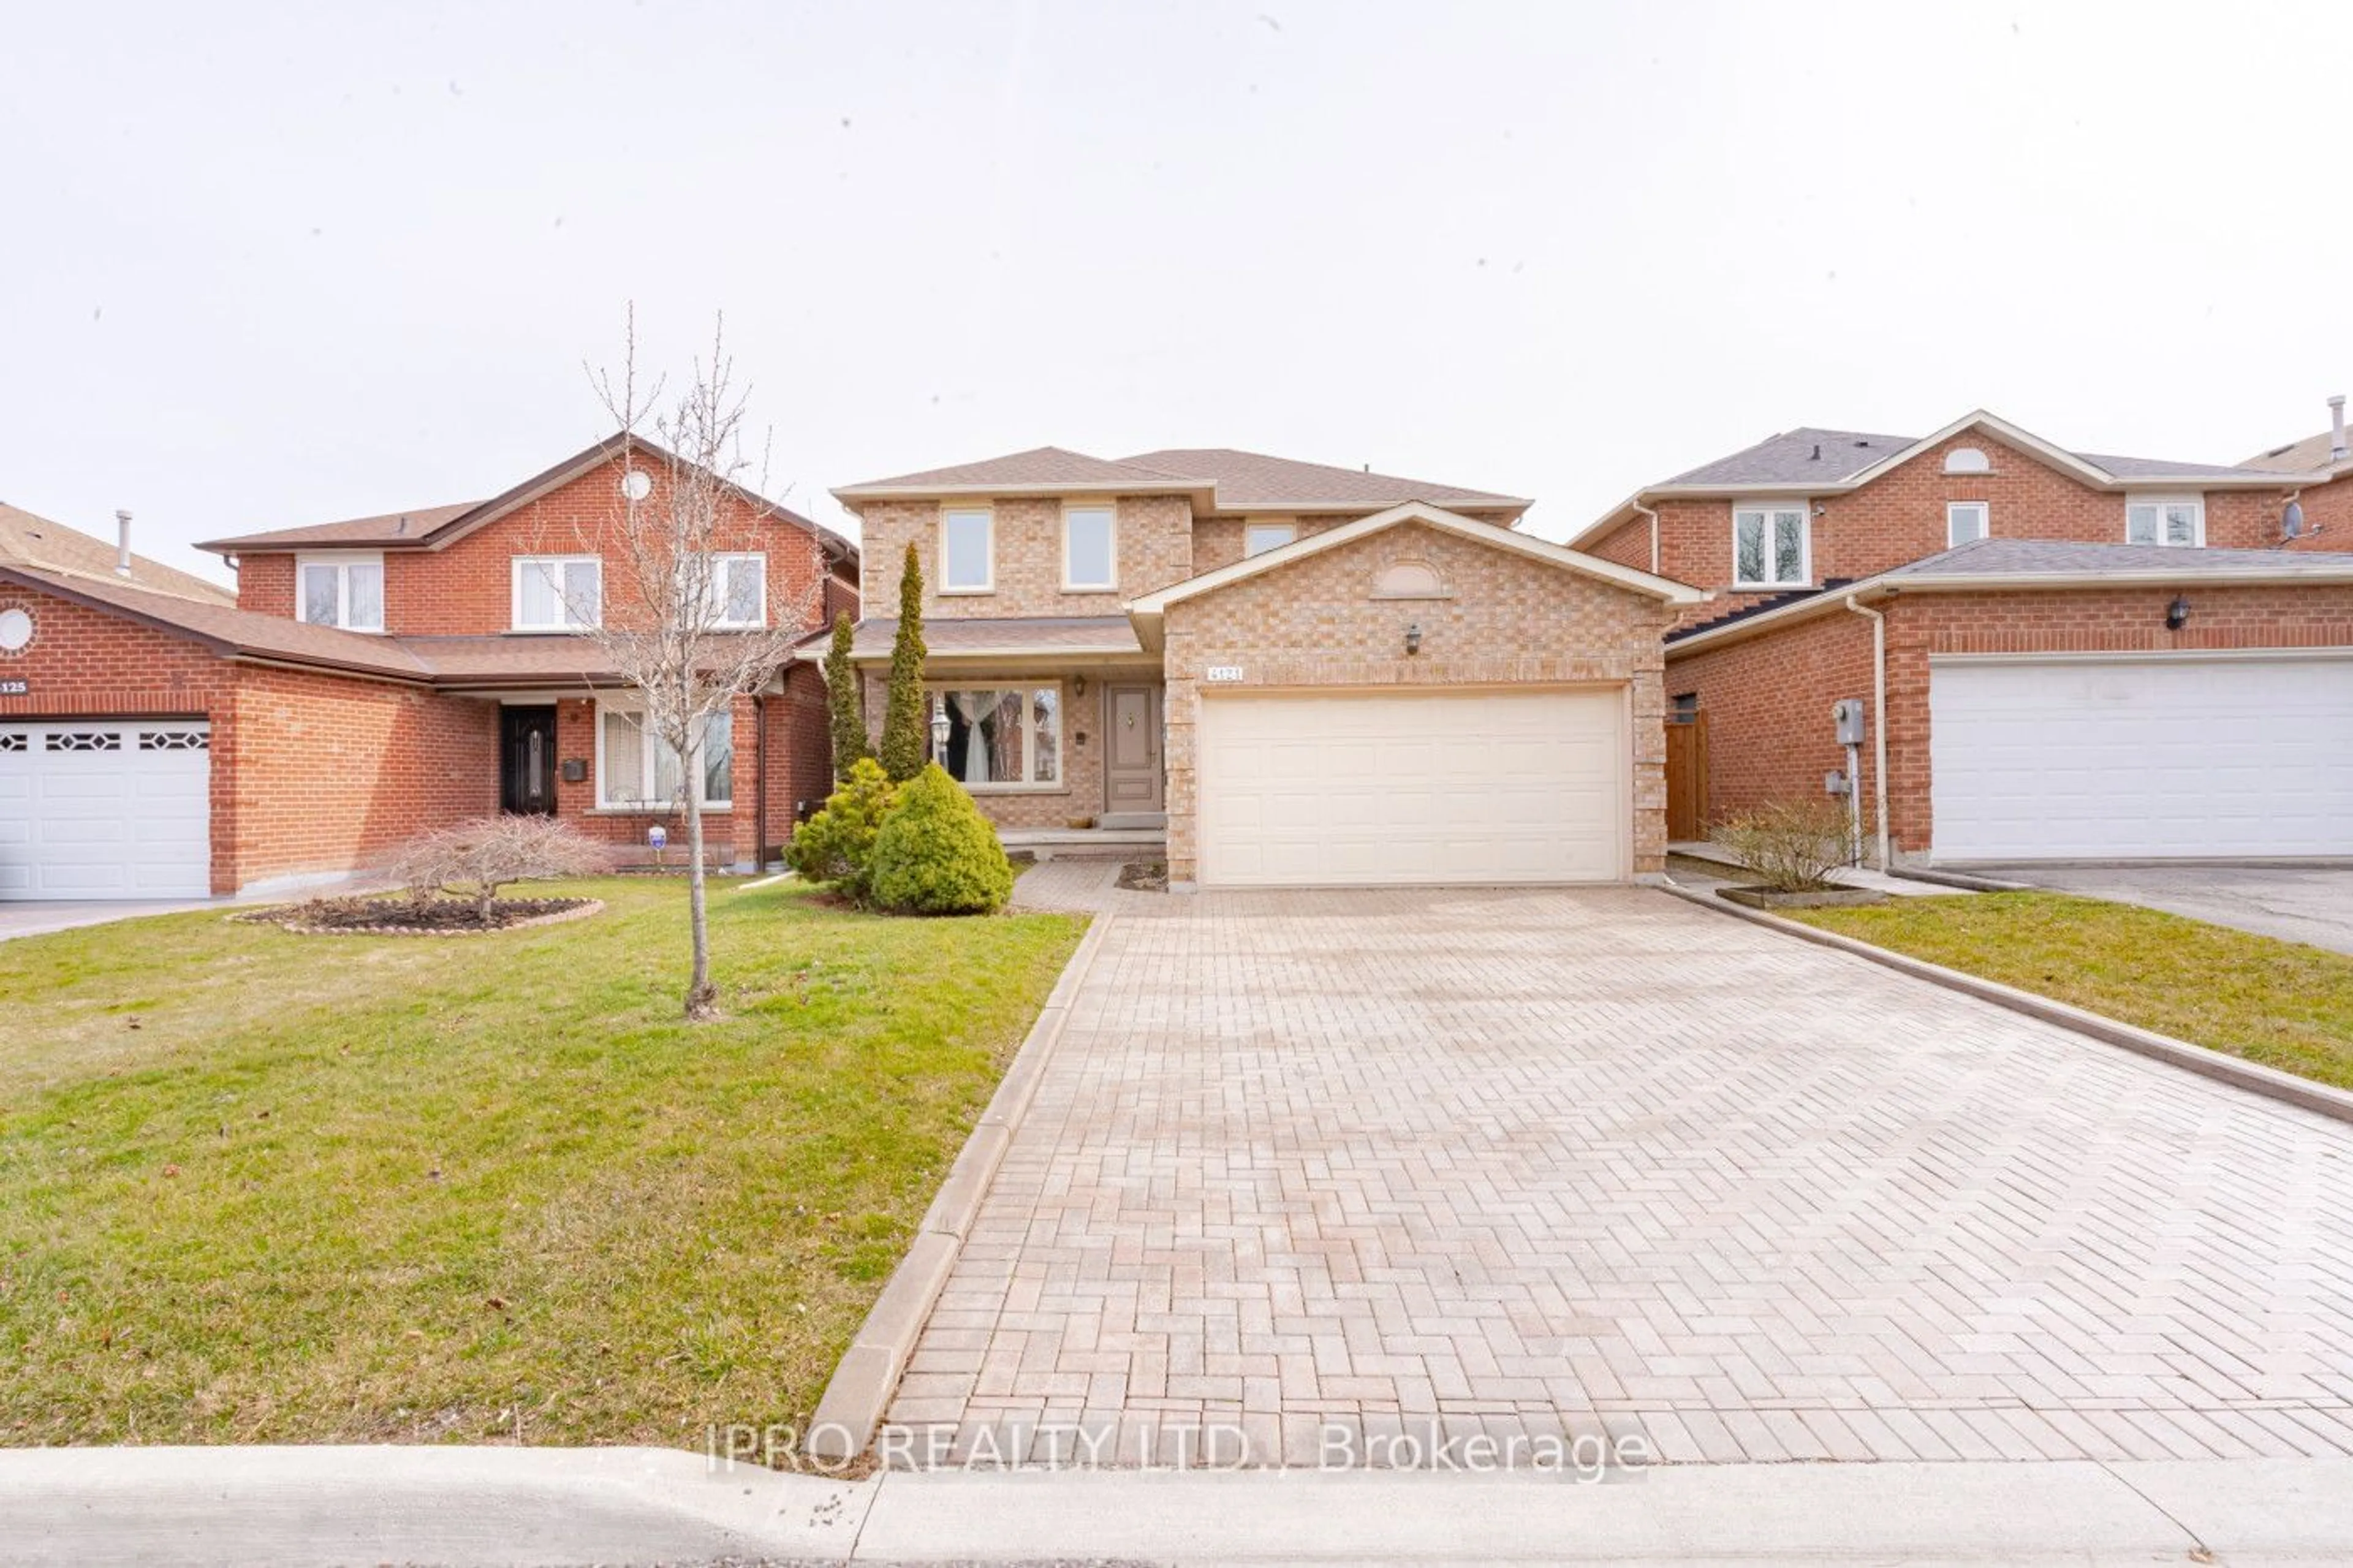 Home with brick exterior material for 4121 Colfax Crt, Mississauga Ontario L4W 4C9